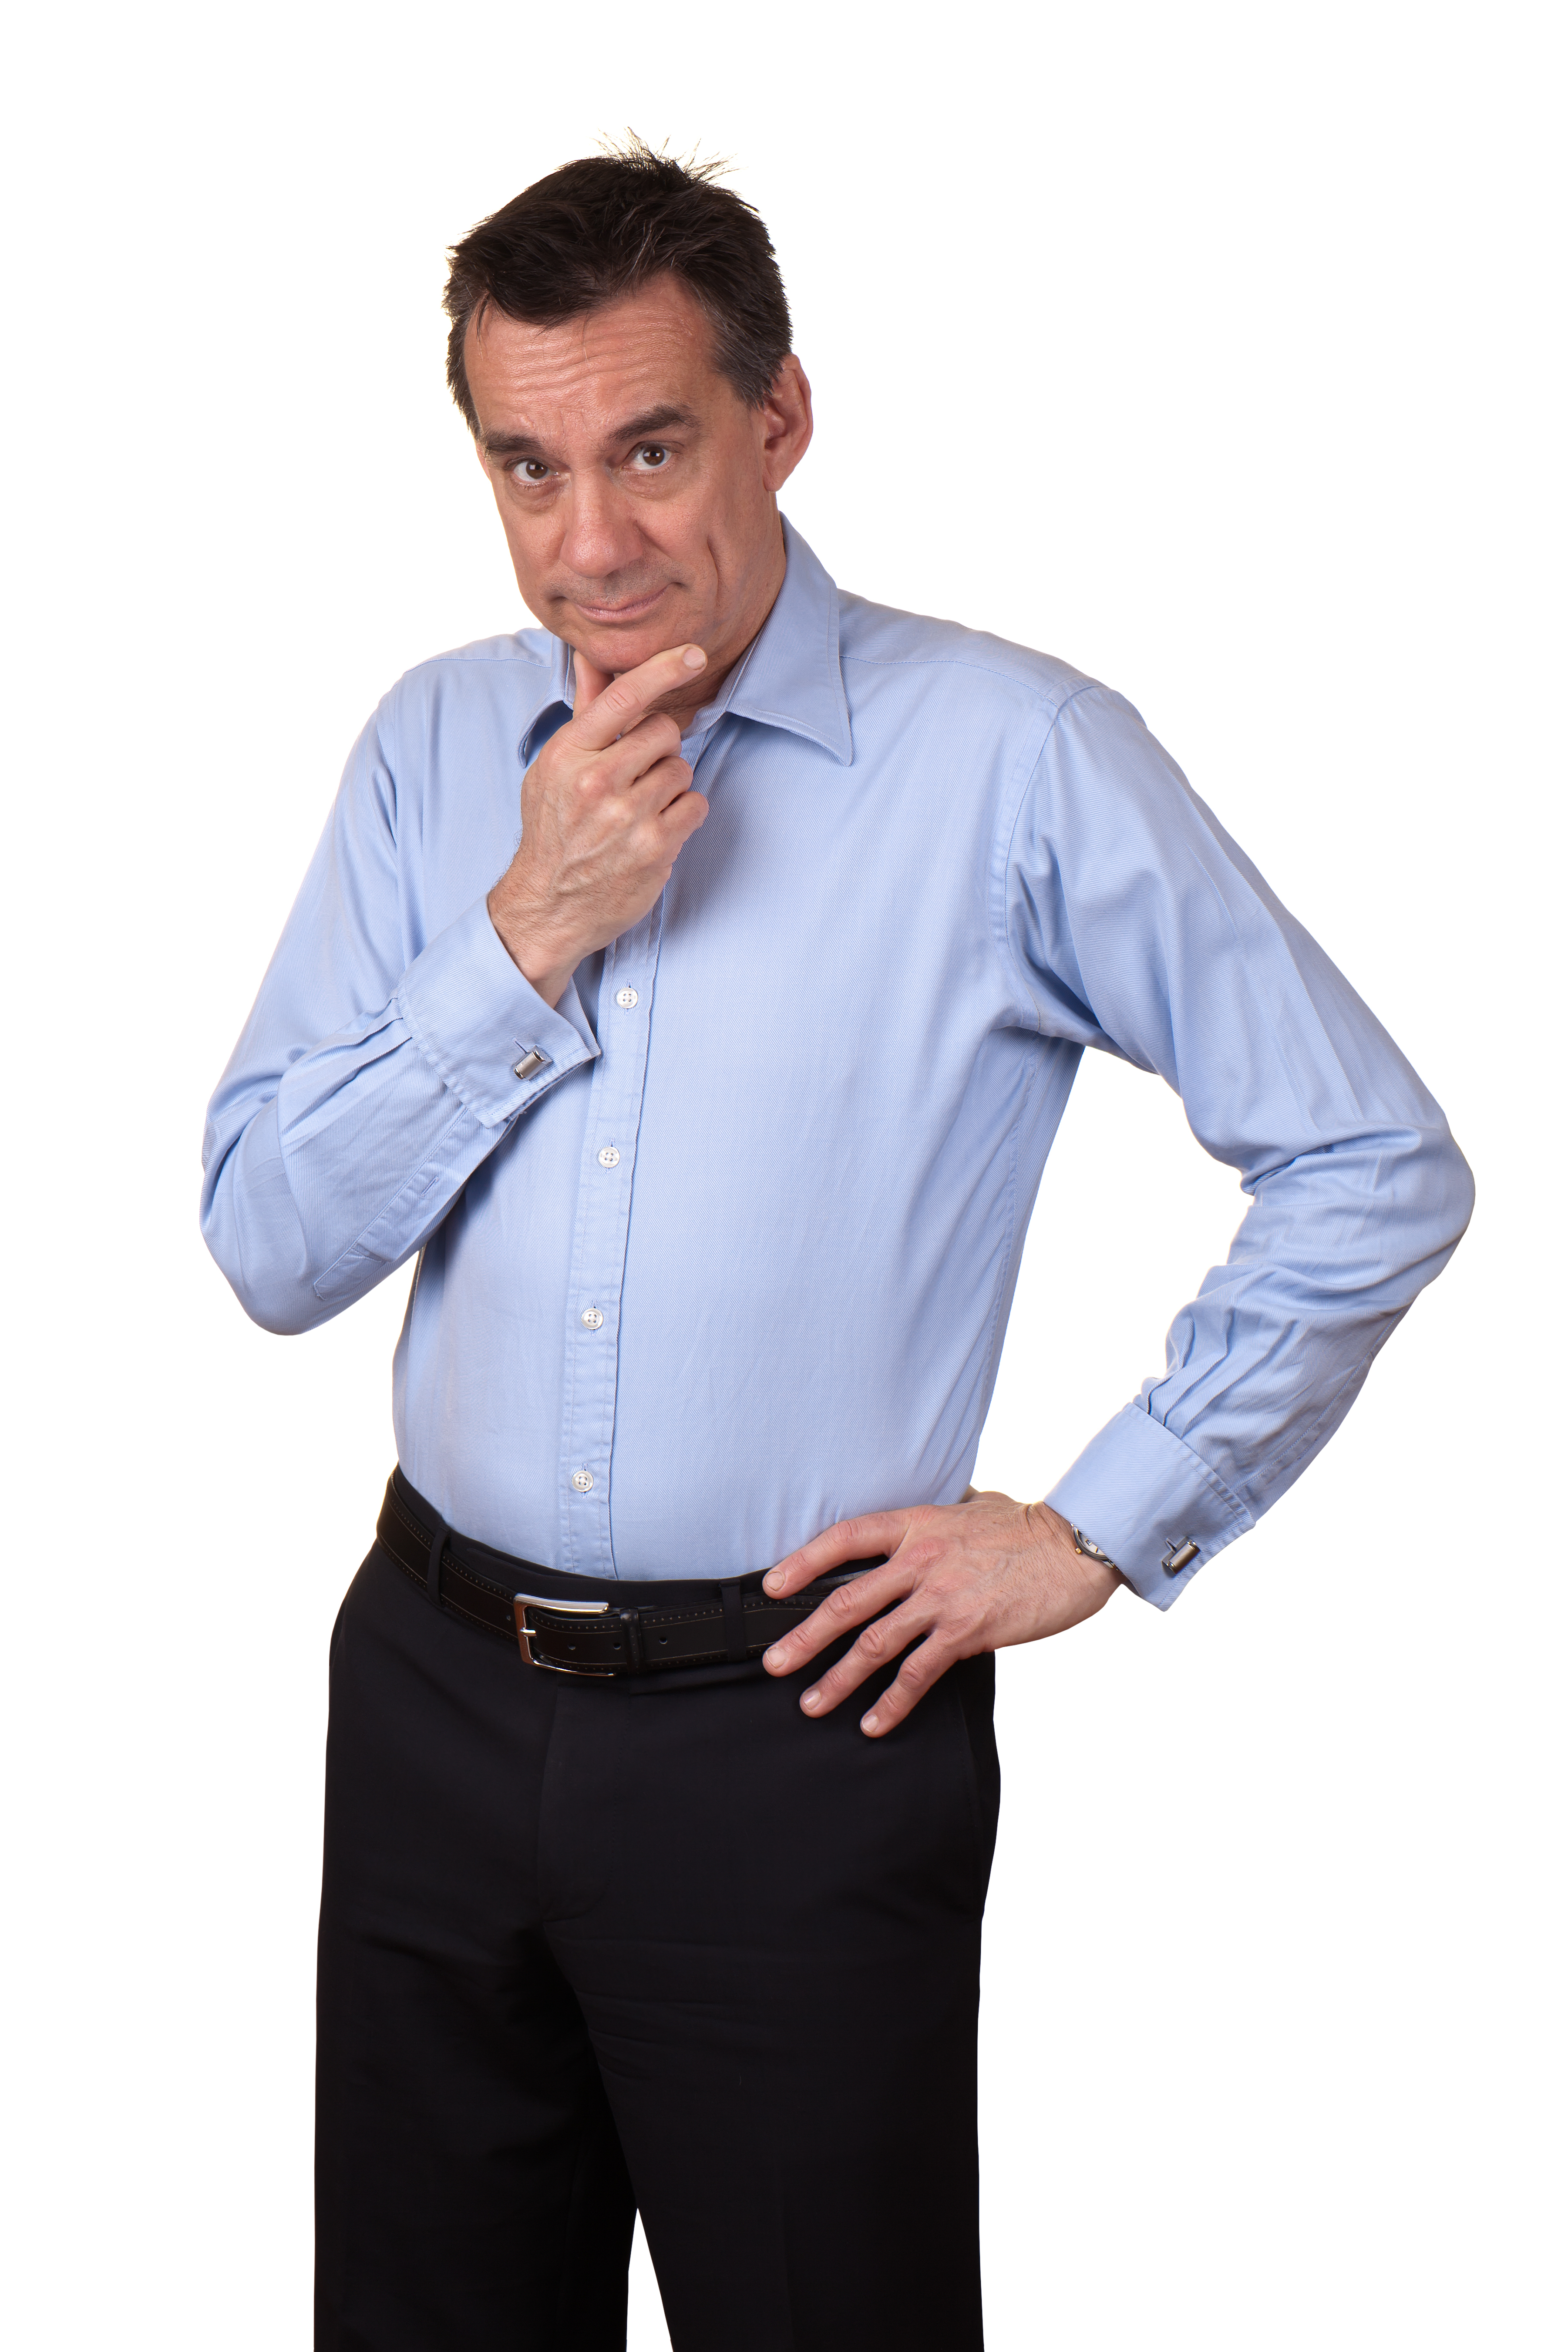 Middle-aged man rubbing his chin | Source: Shutterstock